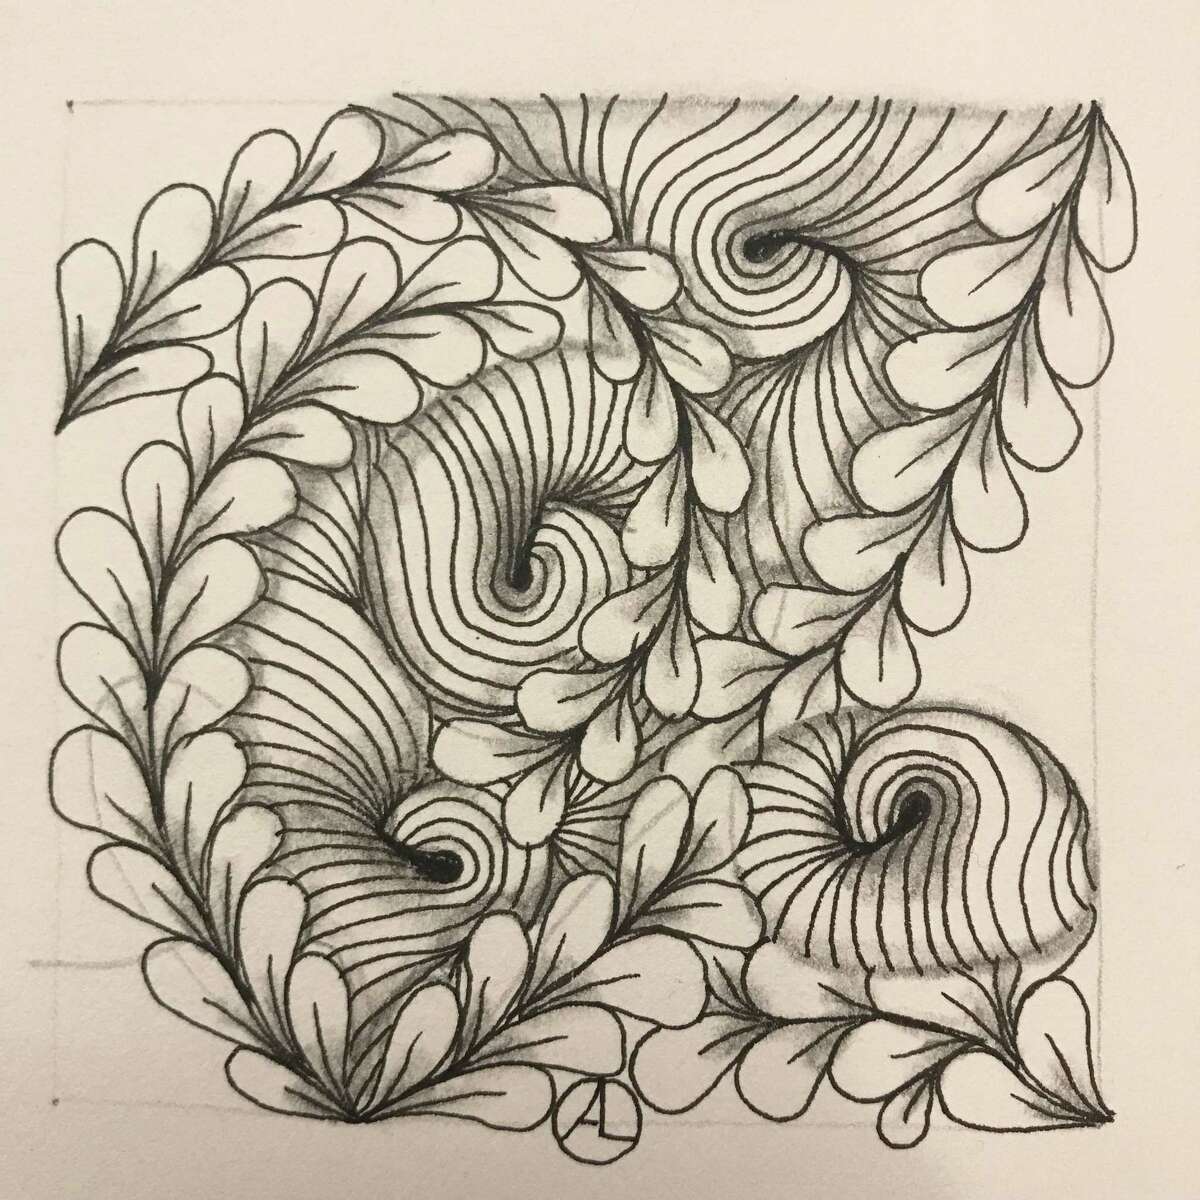 An example of the meditative art form, Zentangle art, that was previously created by the certified Zentangle Instructor at the Wilton Library, Amy Lilien-Harper, is shown. An upcoming event with the Wilton Library is a “Zentangle Art Workshop: Zooming with Amy,” event from 3 to 4:30 p.m., on Monday, Nov. 22.